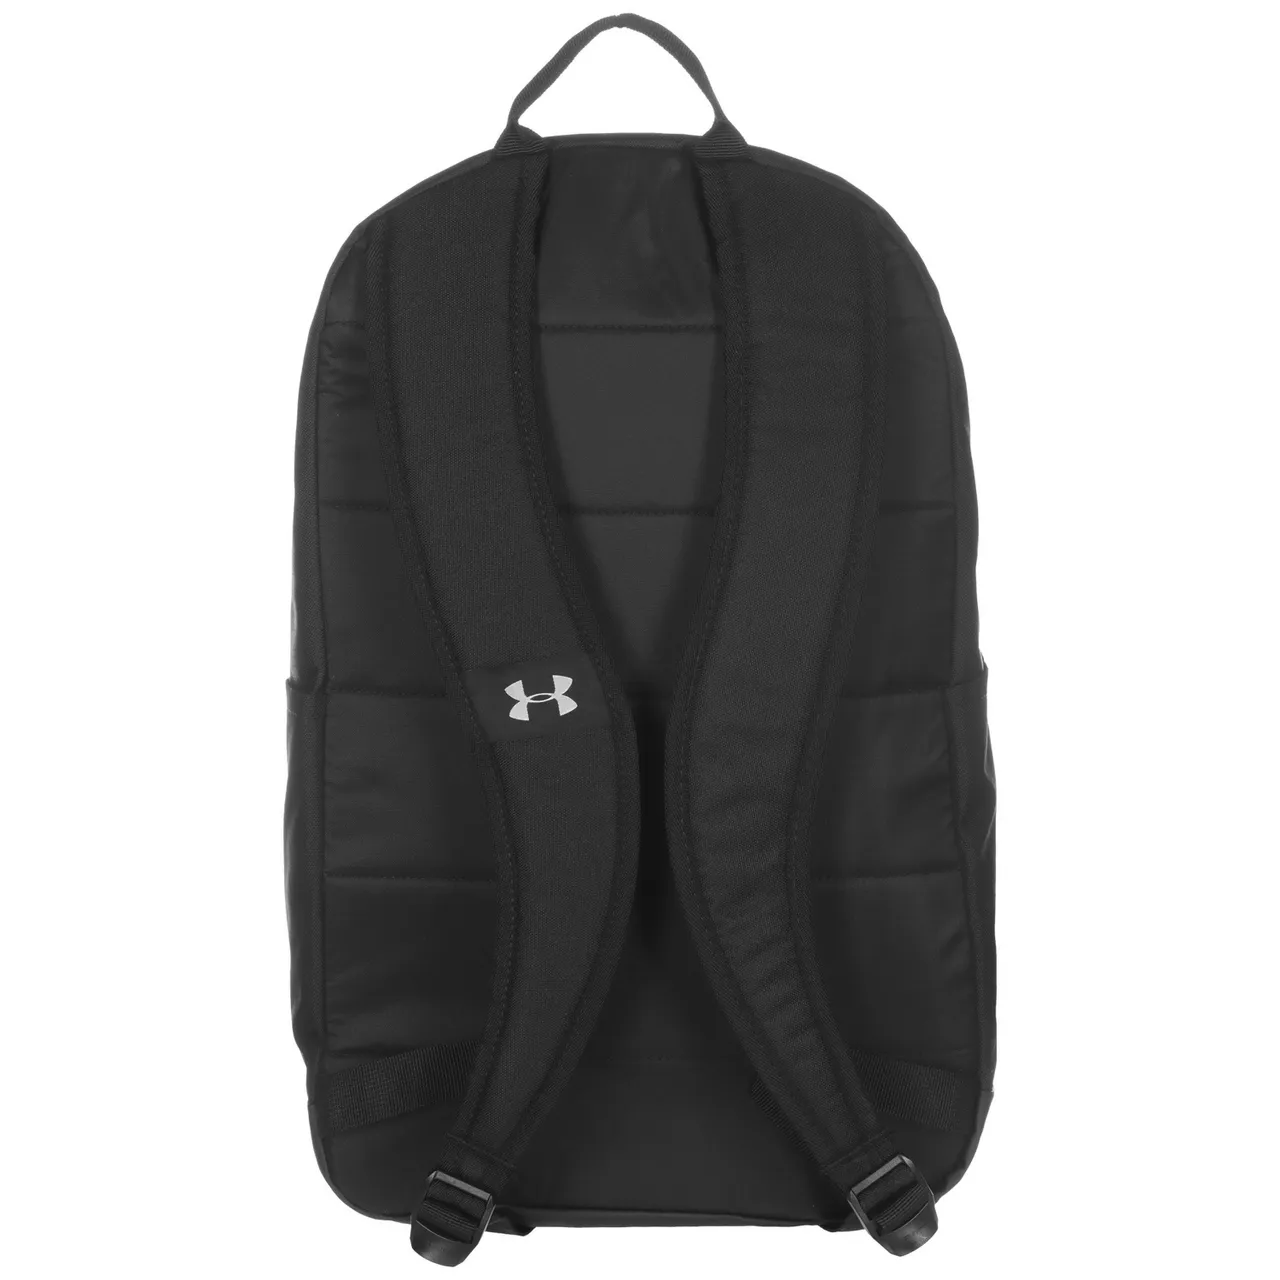 Under Armour Halftime Daypack